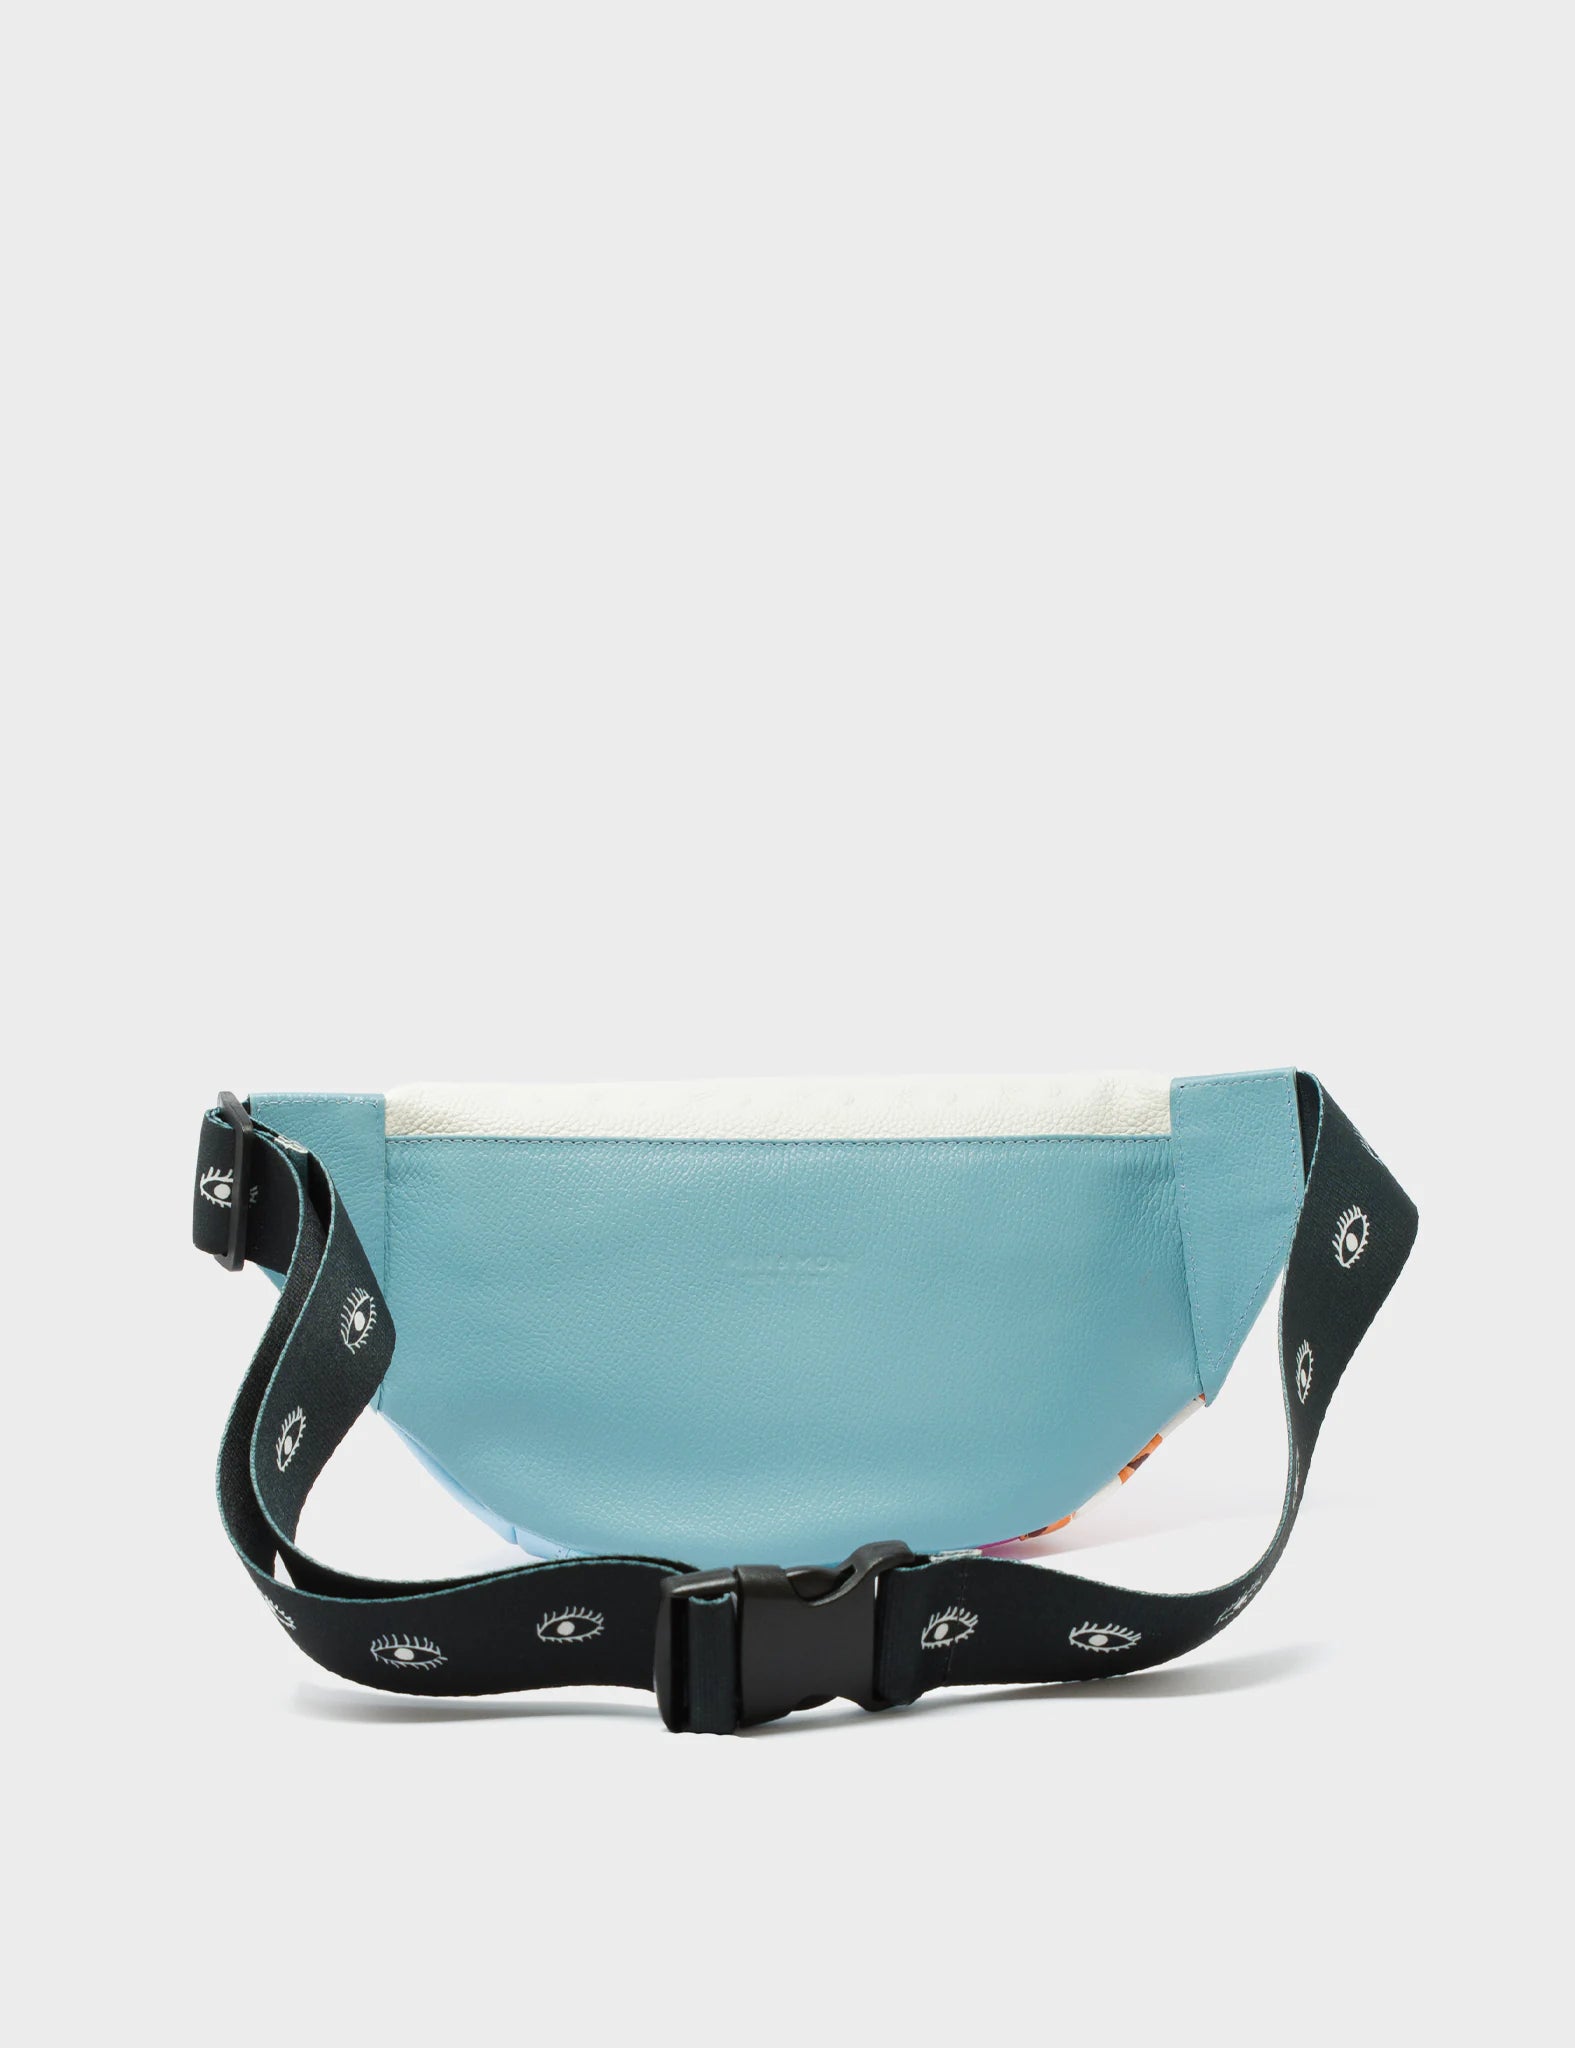 Bag Fanny Pack Cream And Blue Leather - Eyes Pattern Debossed - Back 